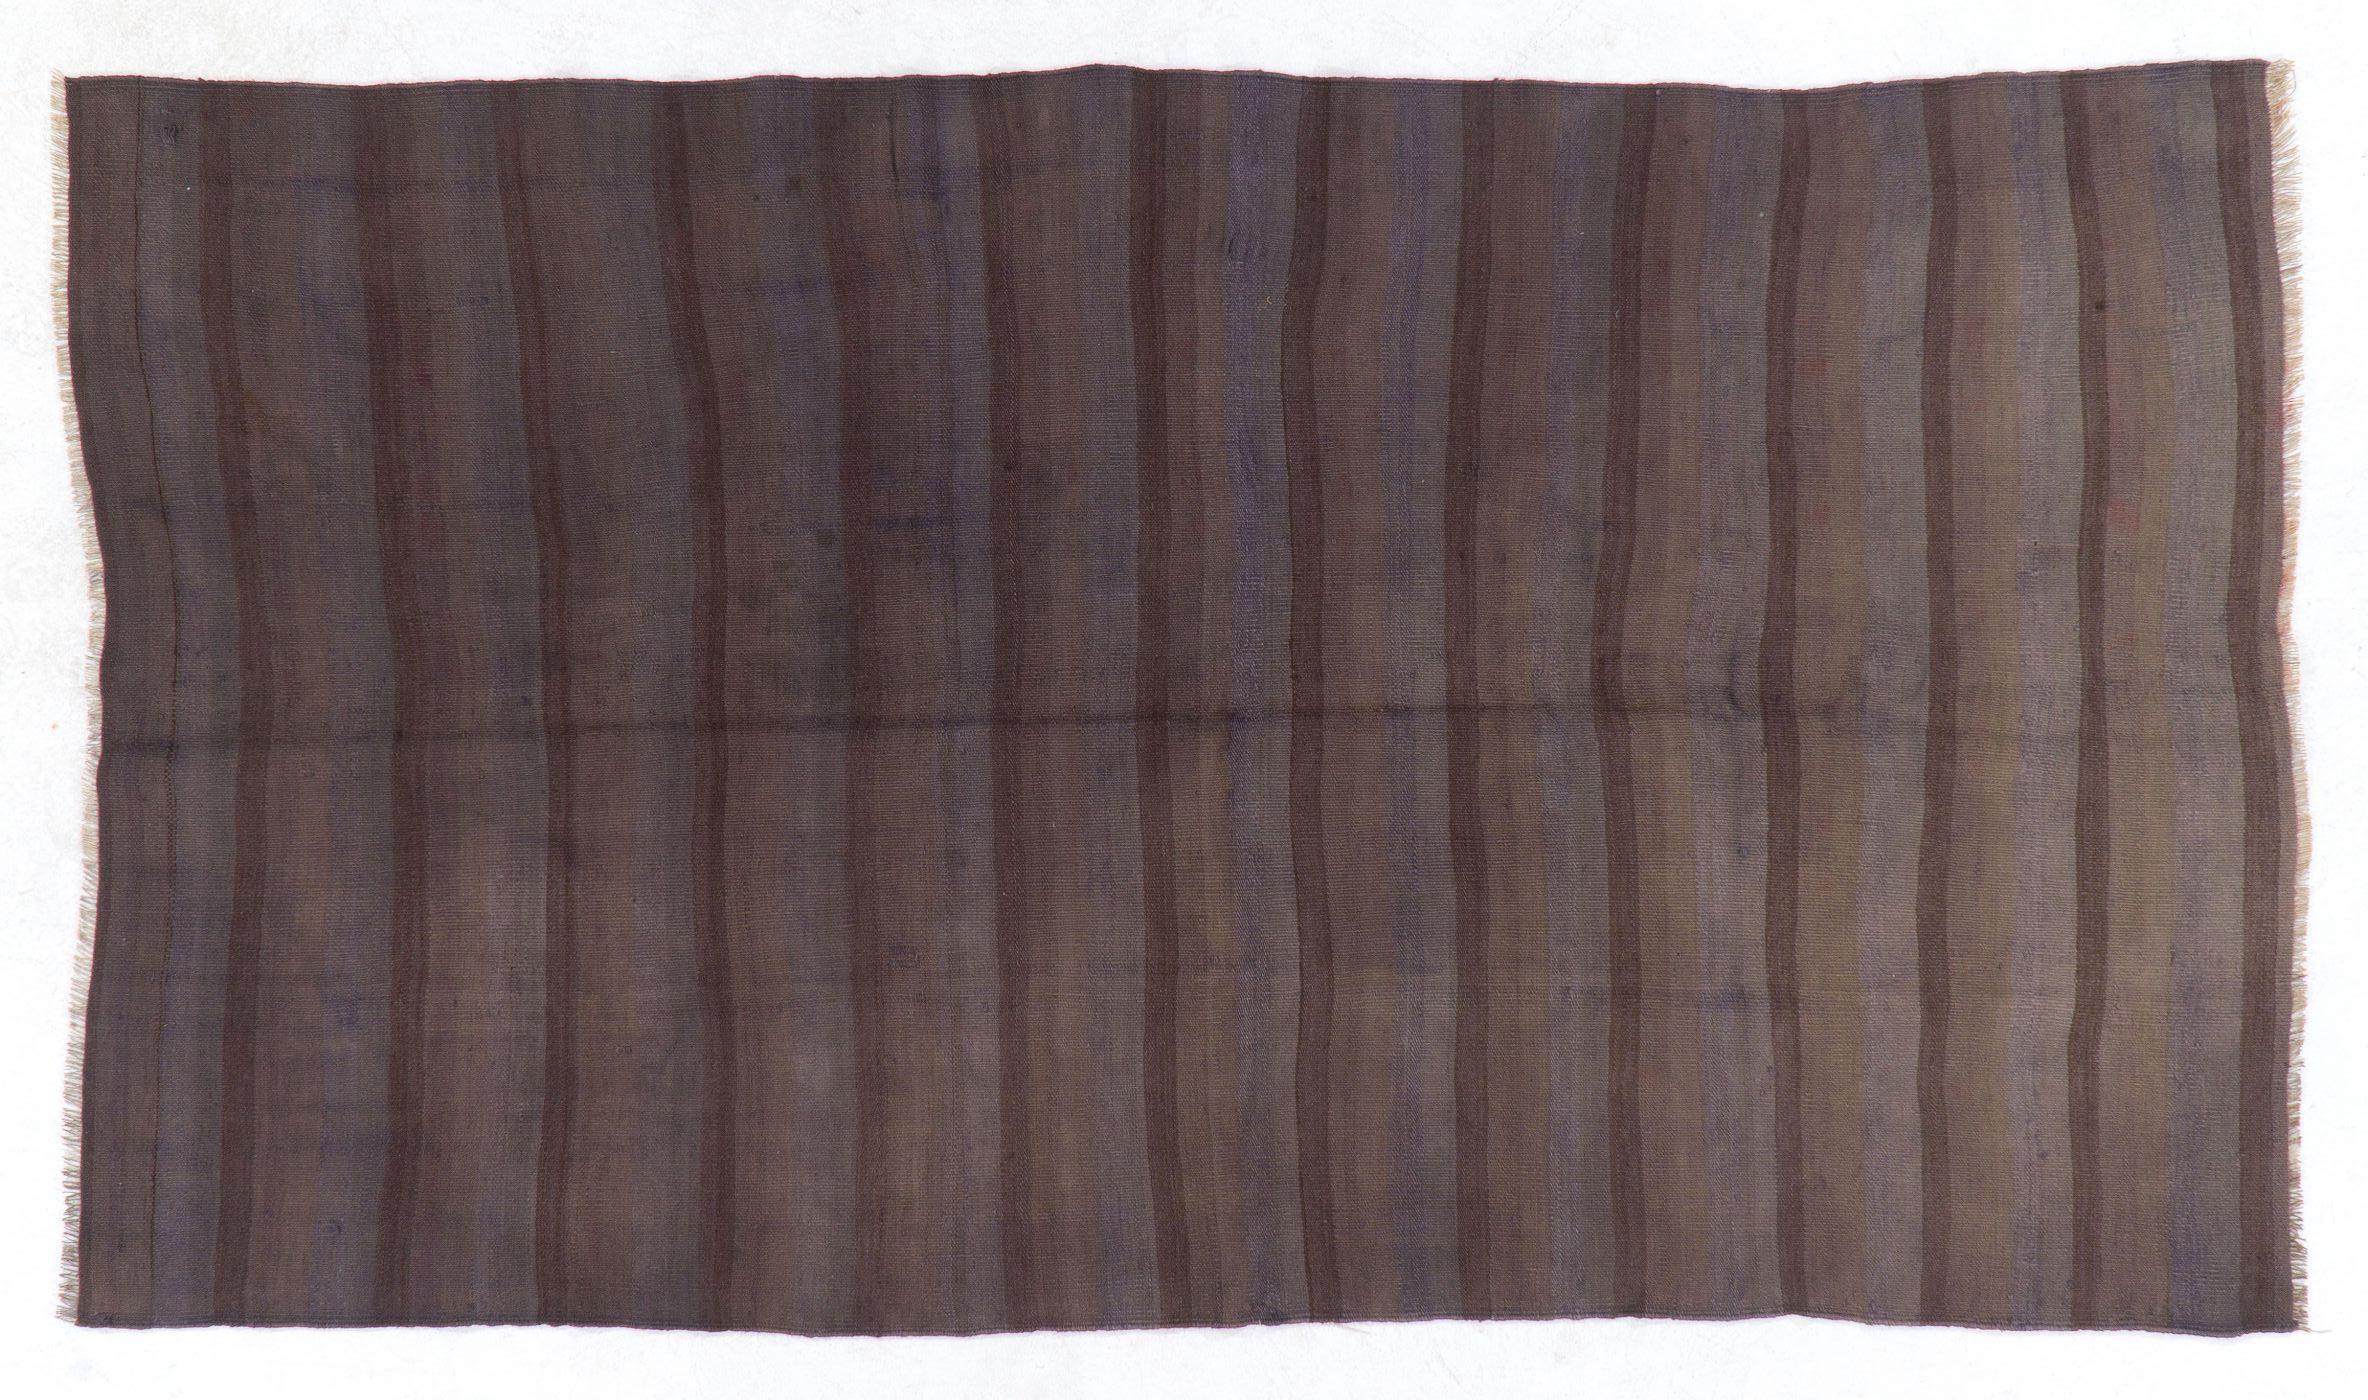 20th Century Hand-Woven Vintage Turkish Wool Kilim 'Flat-weave' with Striped Design For Sale